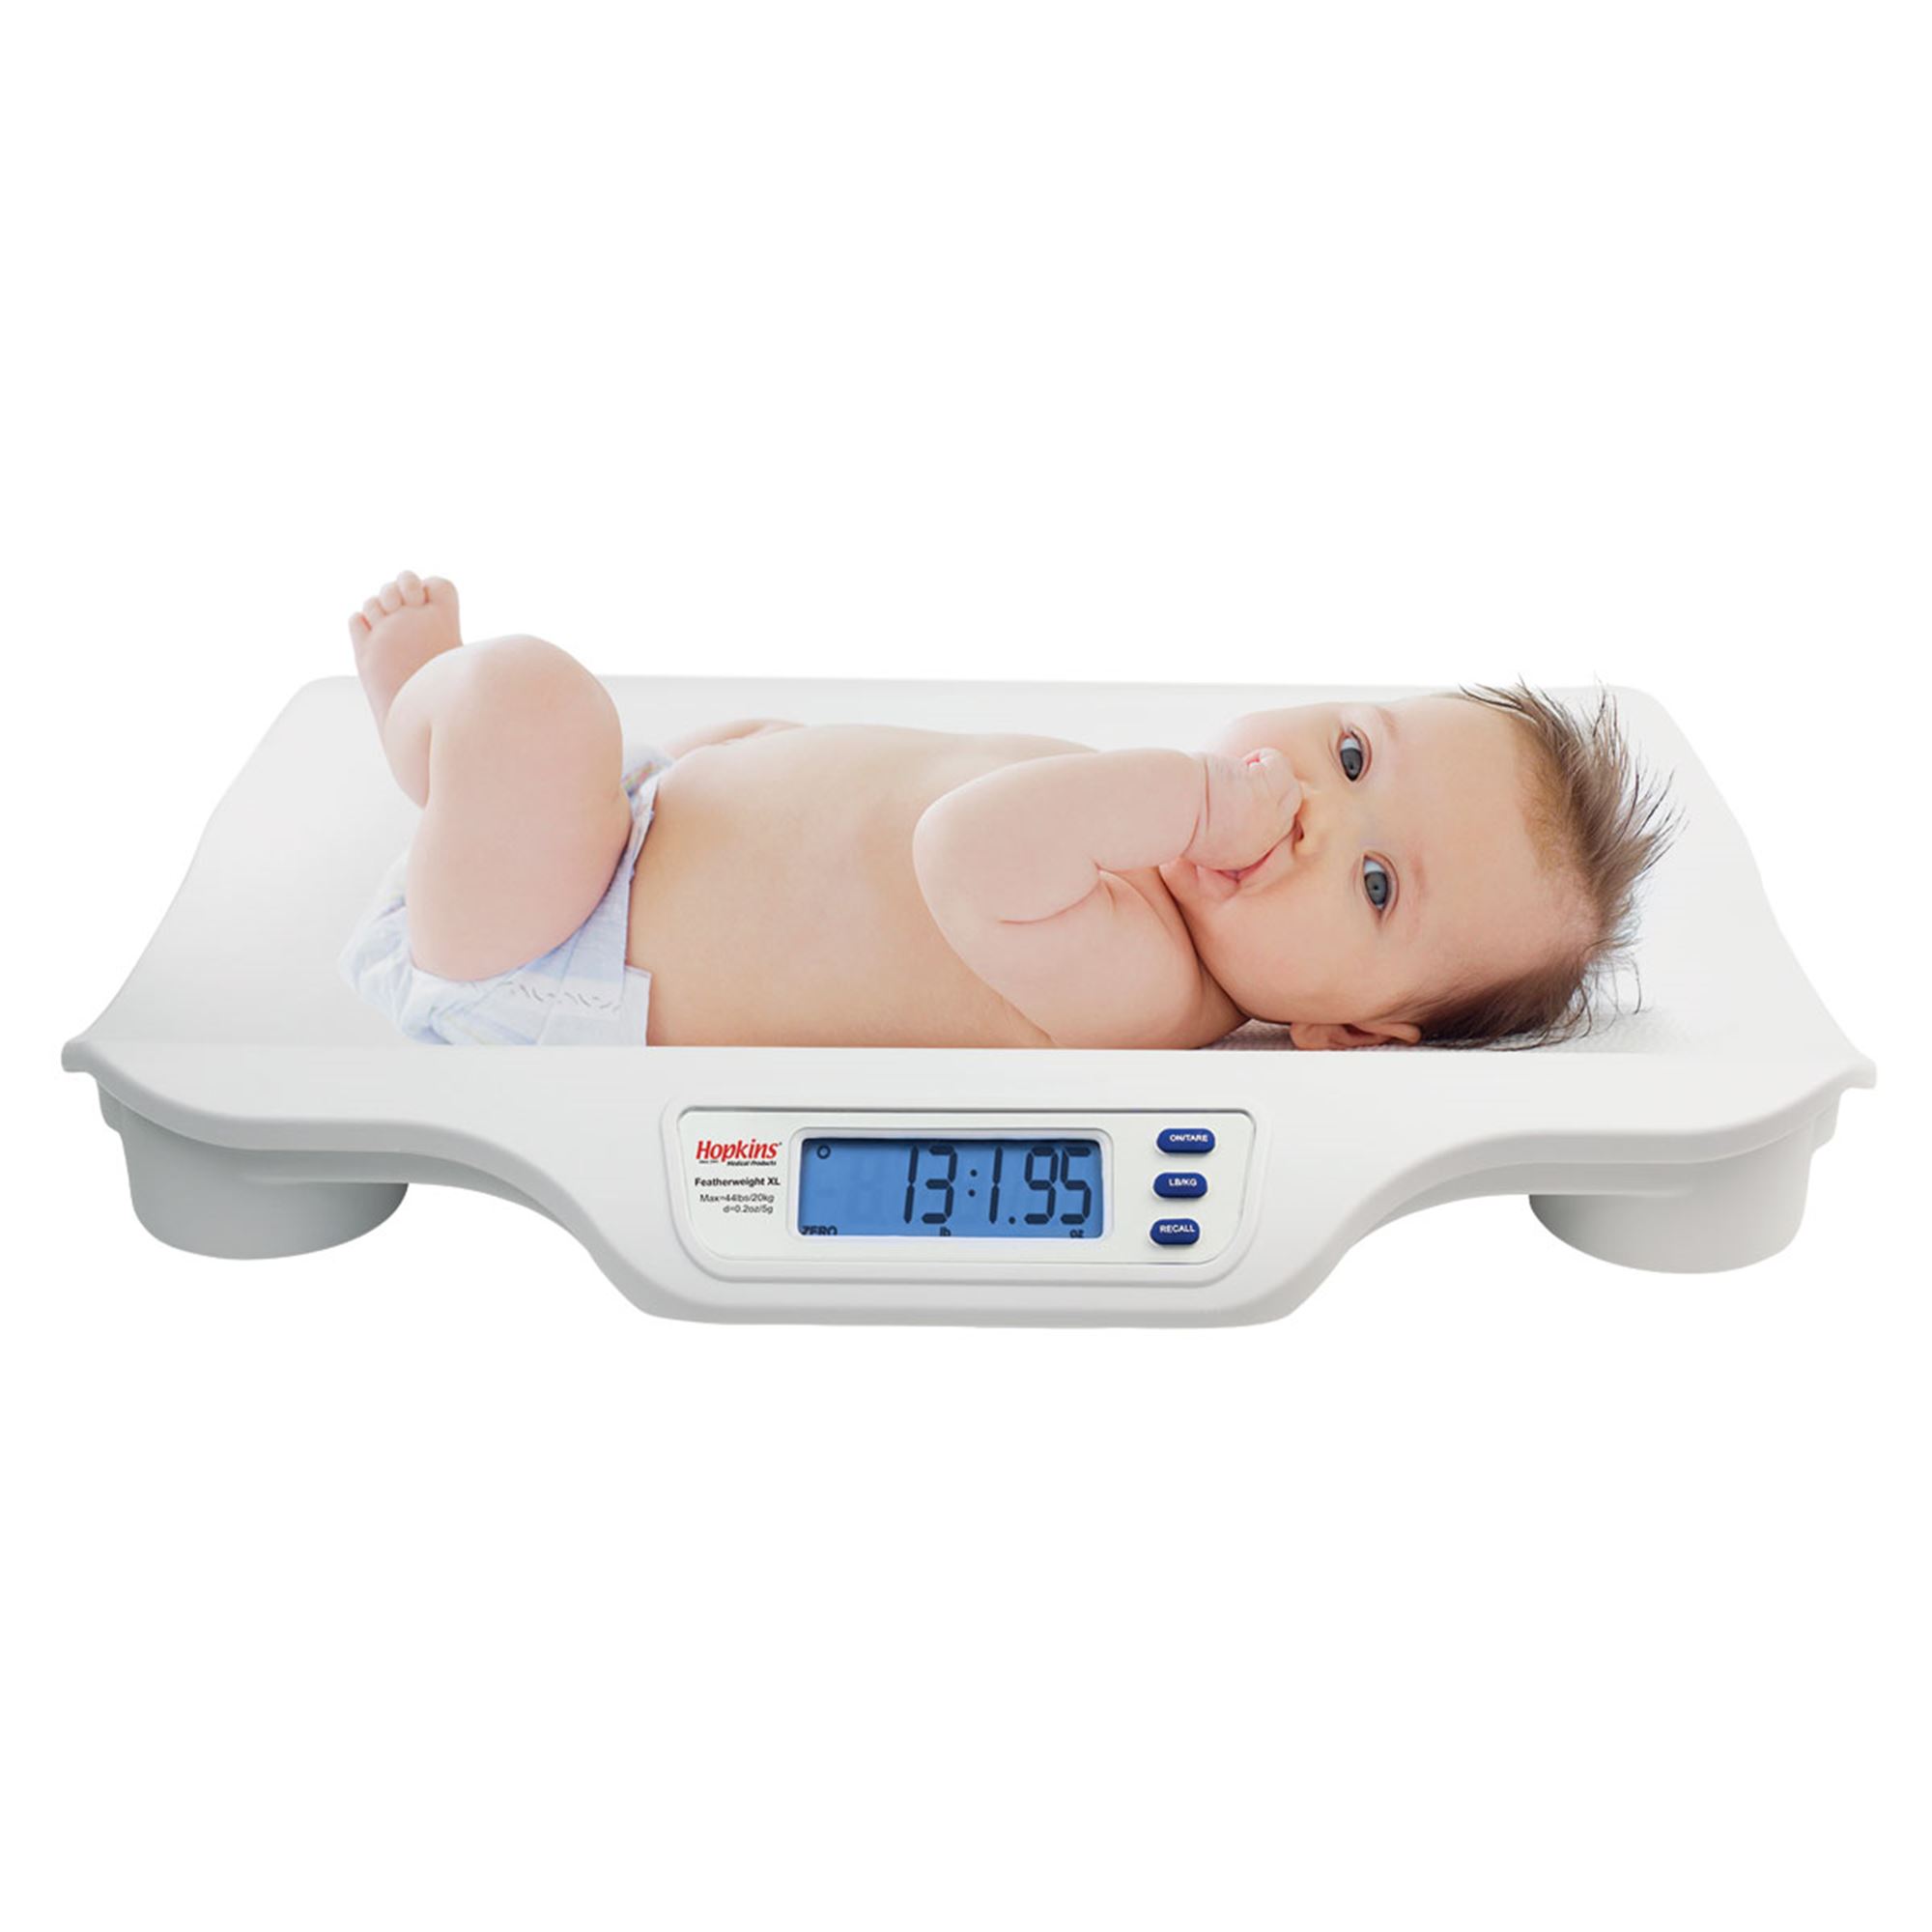 Baby Scale dealers in Chennai